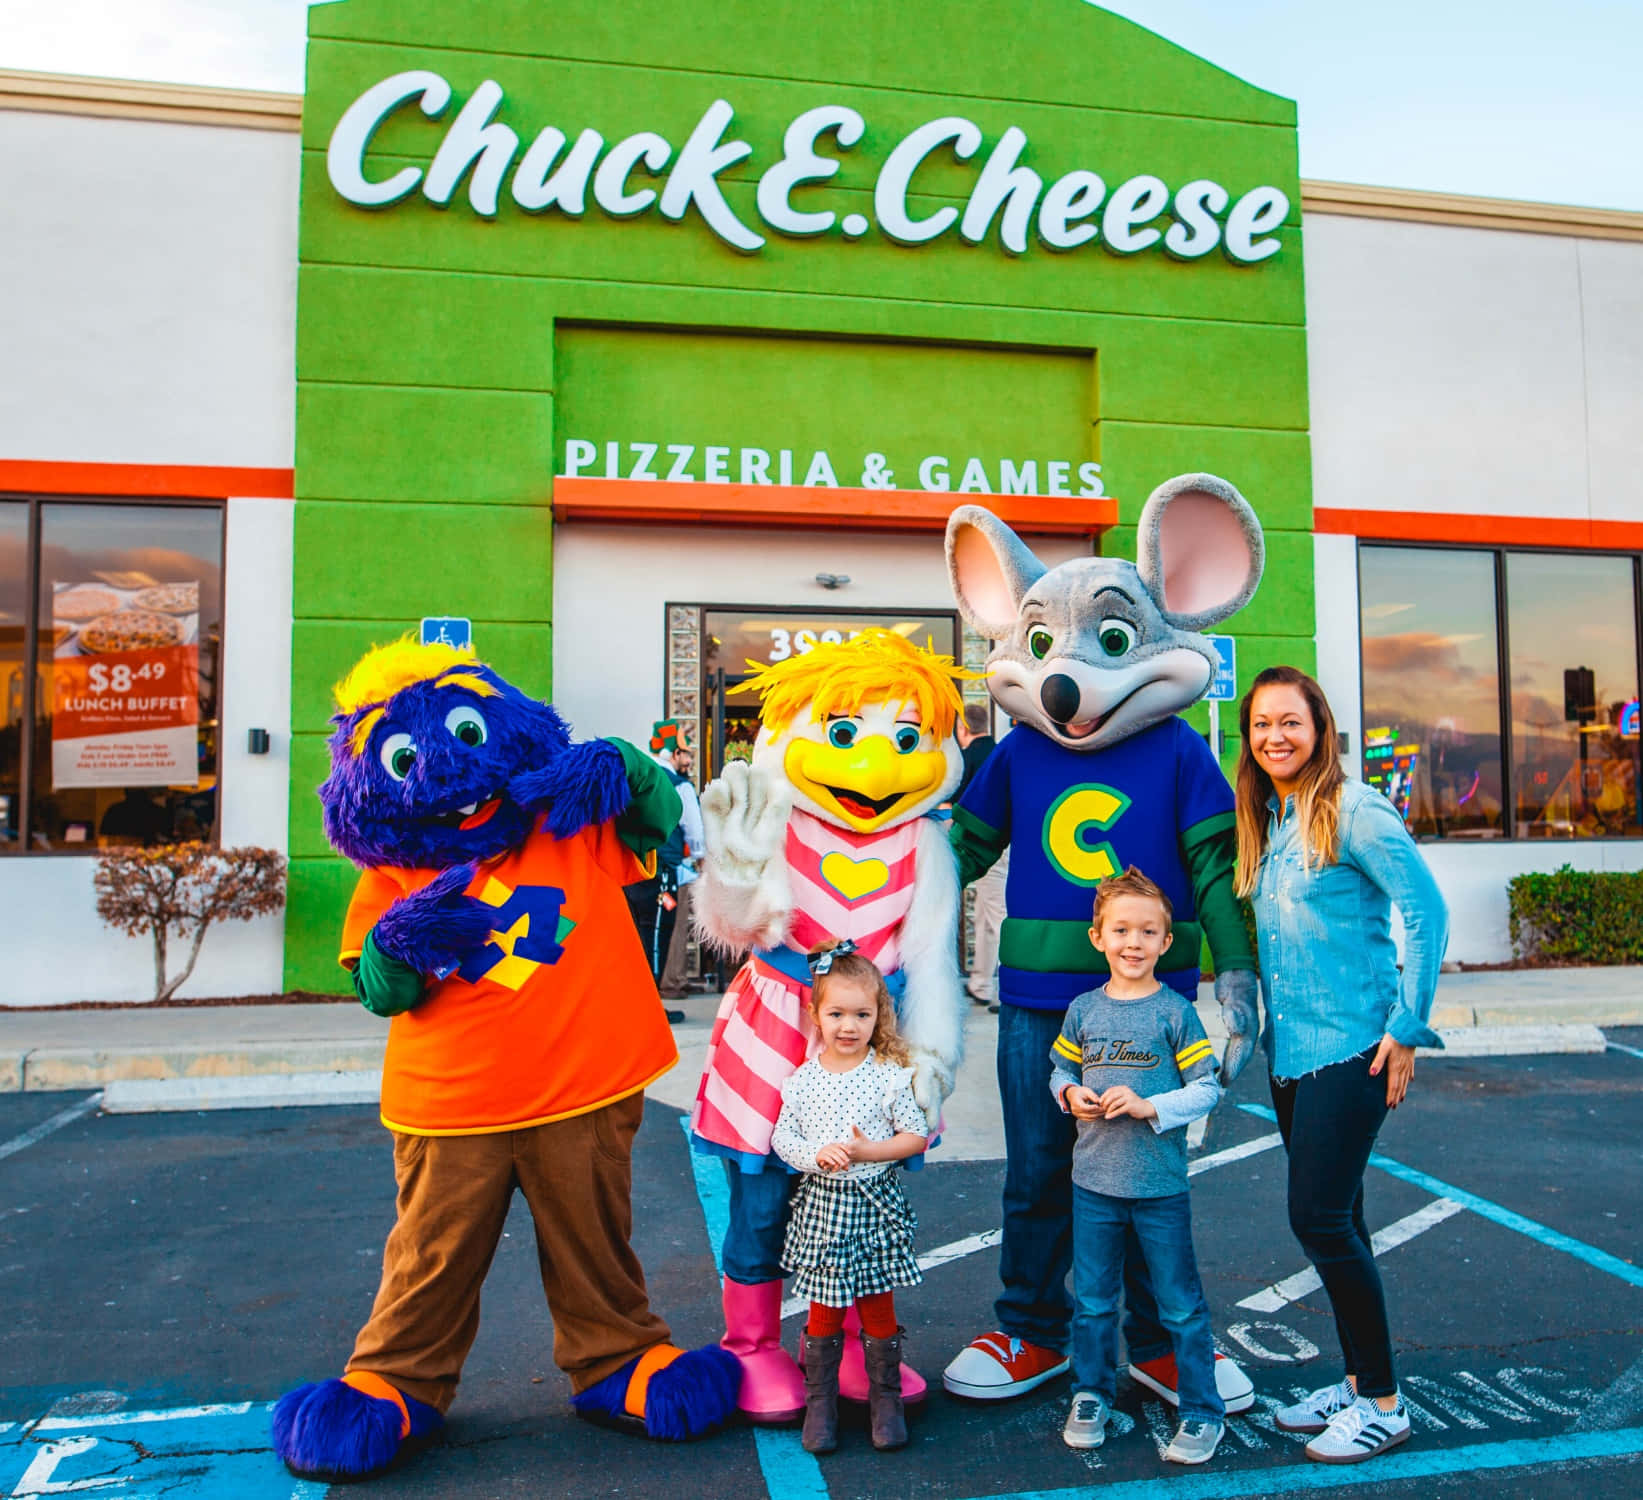 "Come for the fun and games at Chuck E Cheese!"